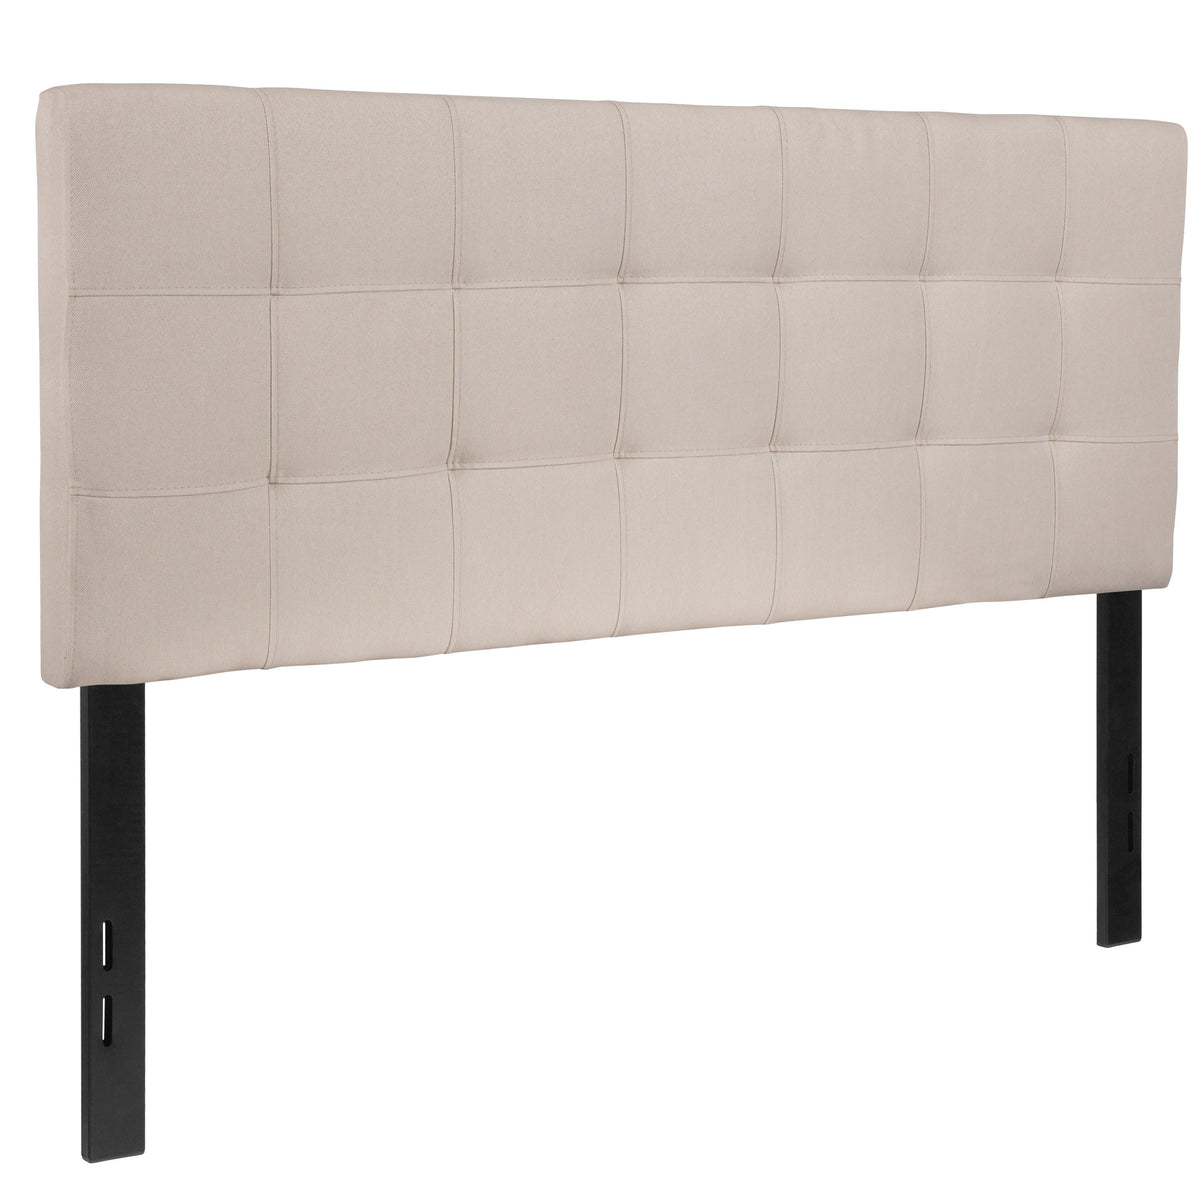 Beige,Full |#| Quilted Tufted Upholstered Full Size Headboard in Beige Fabric